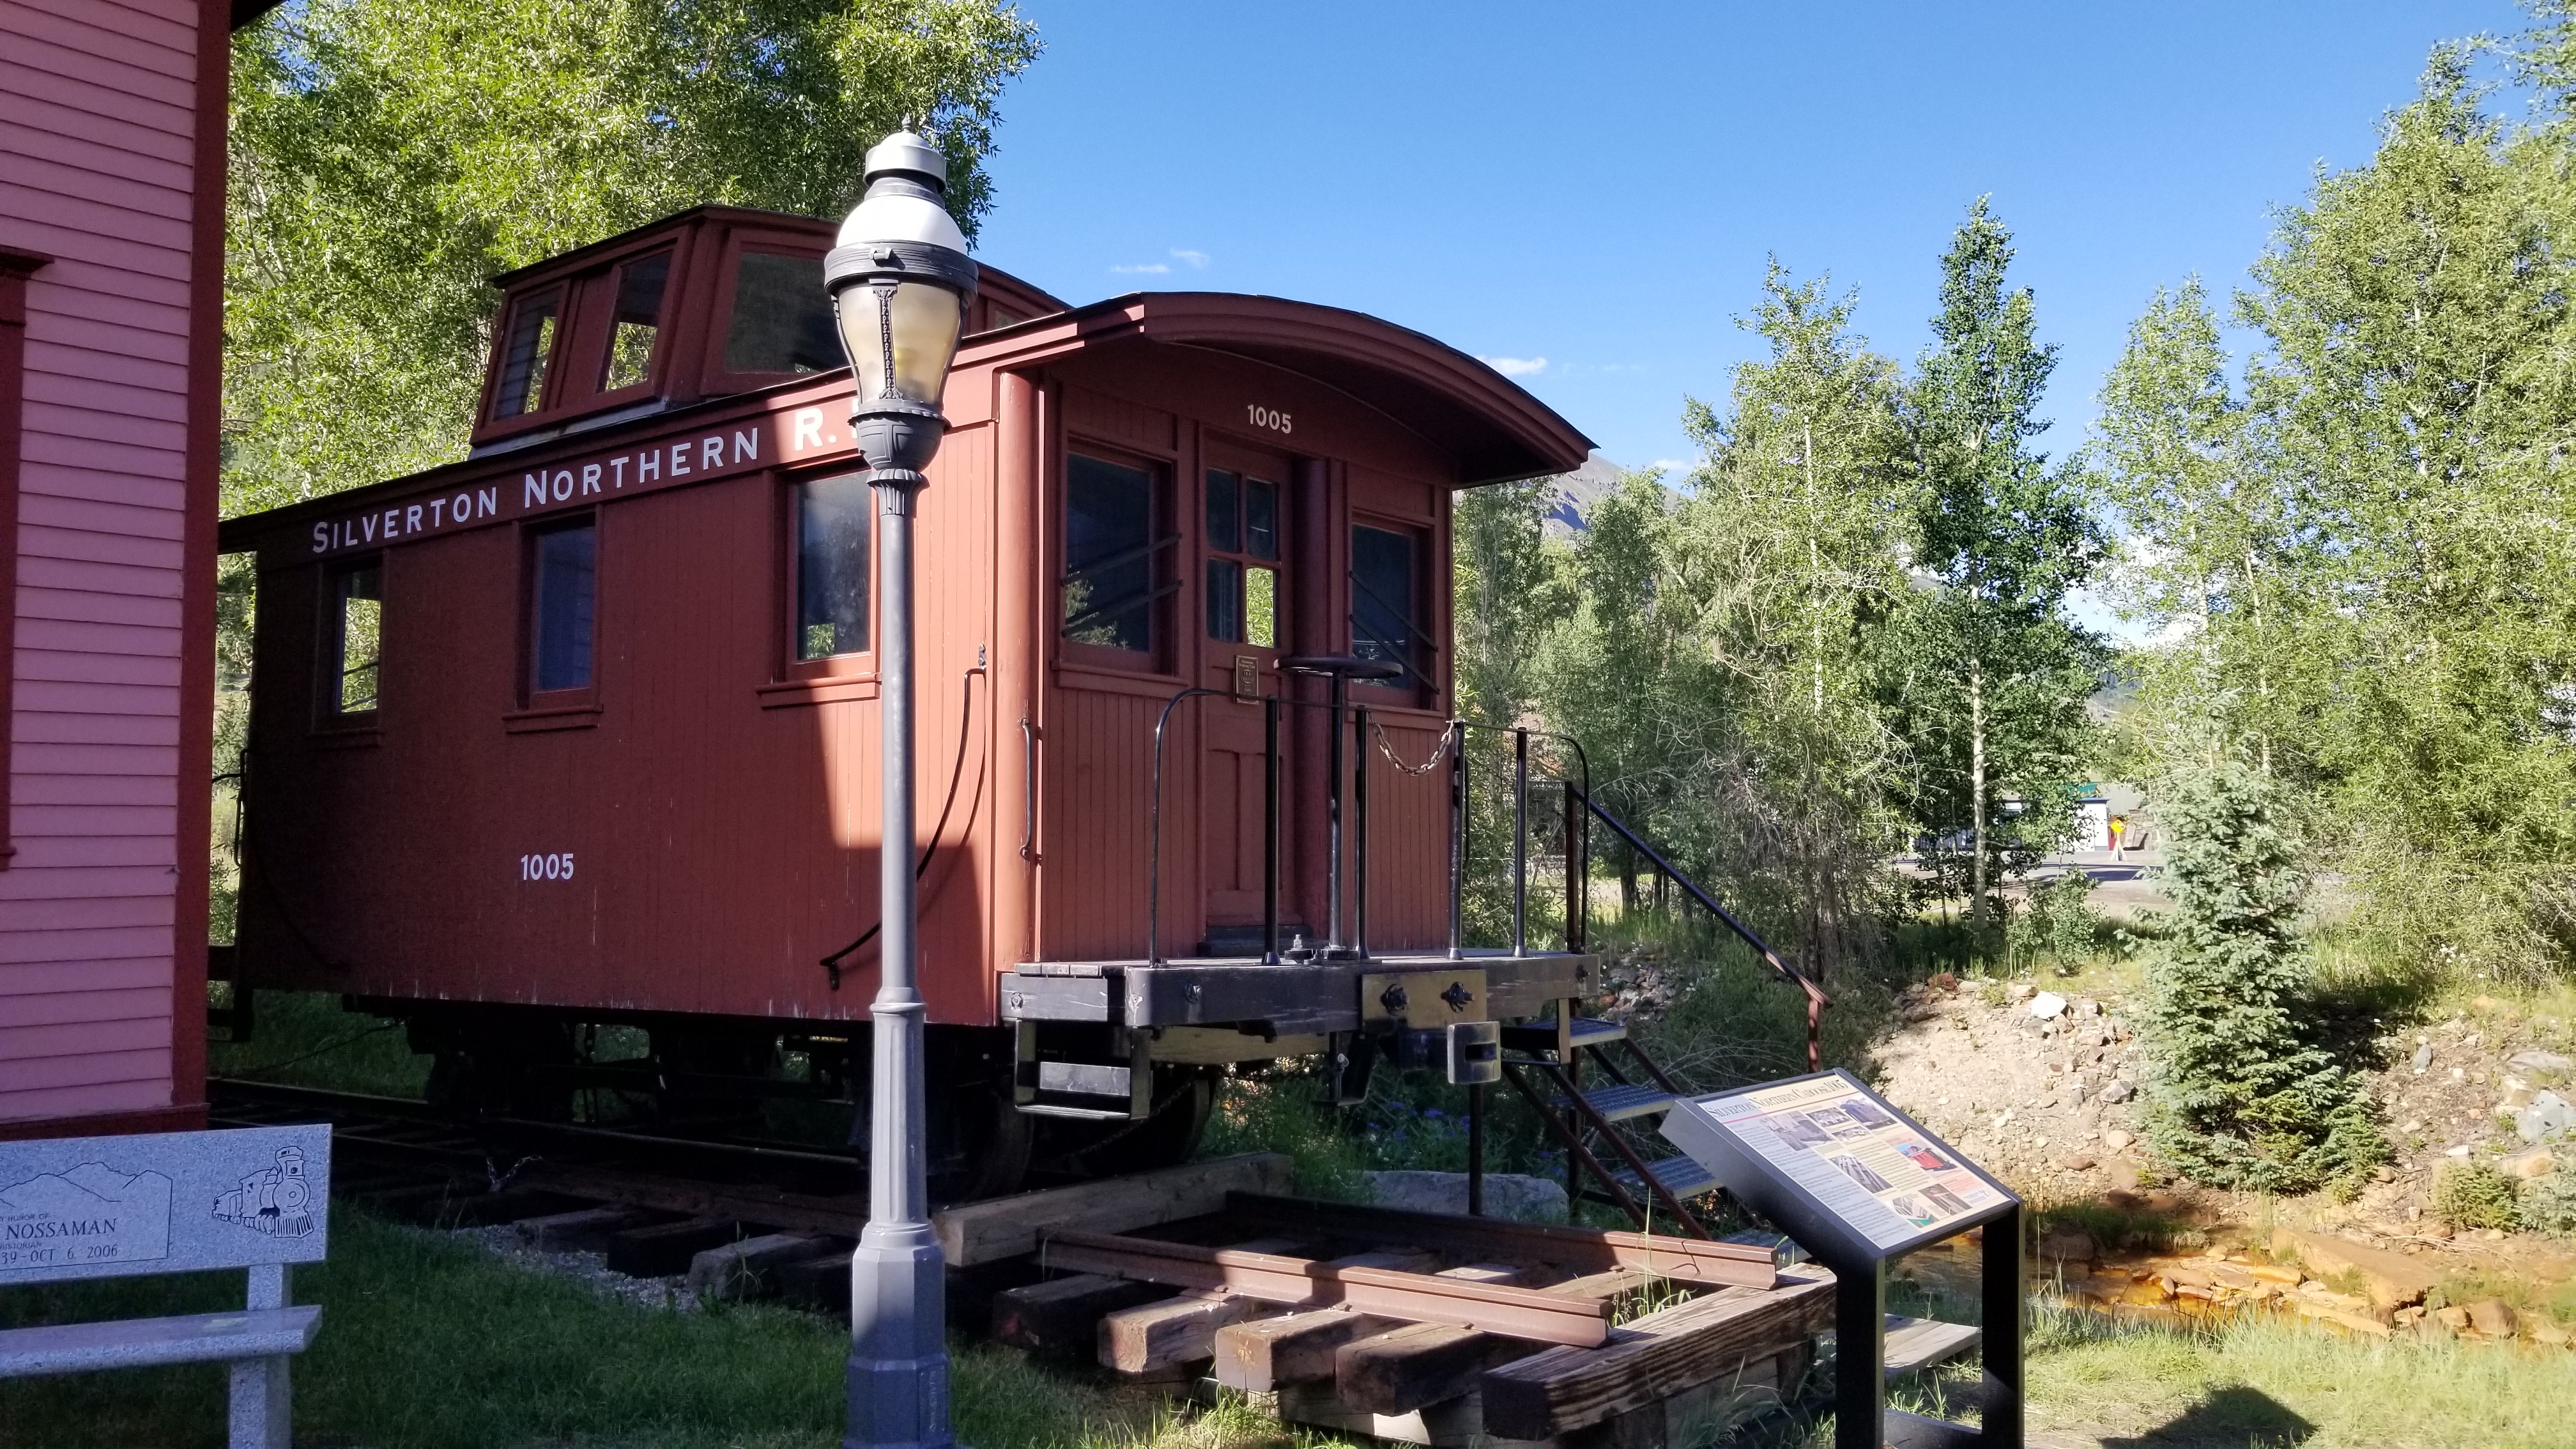 Side angle of the Silverton Northern Caboose 1005